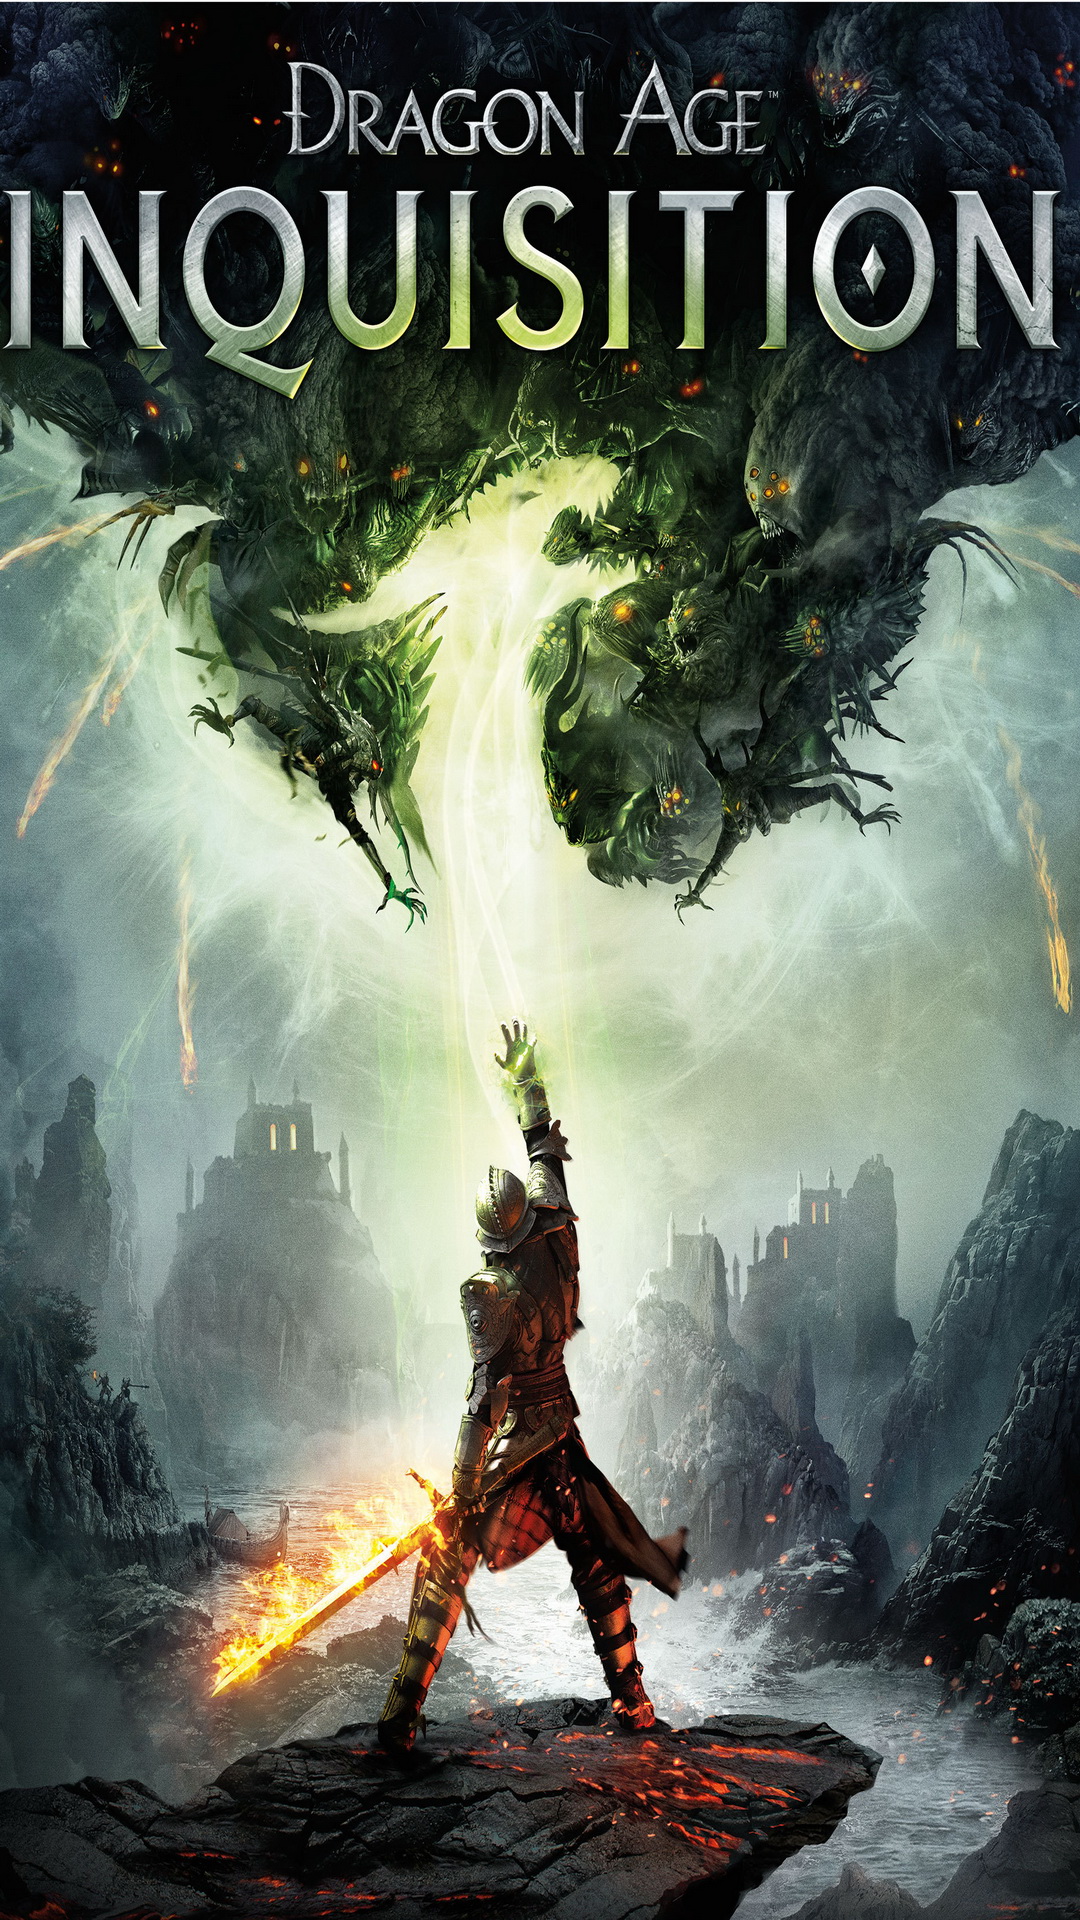 Dragon age inquisition iPhone6 plus Wallpaper for iPhone 4S and iPhone 1080x1920